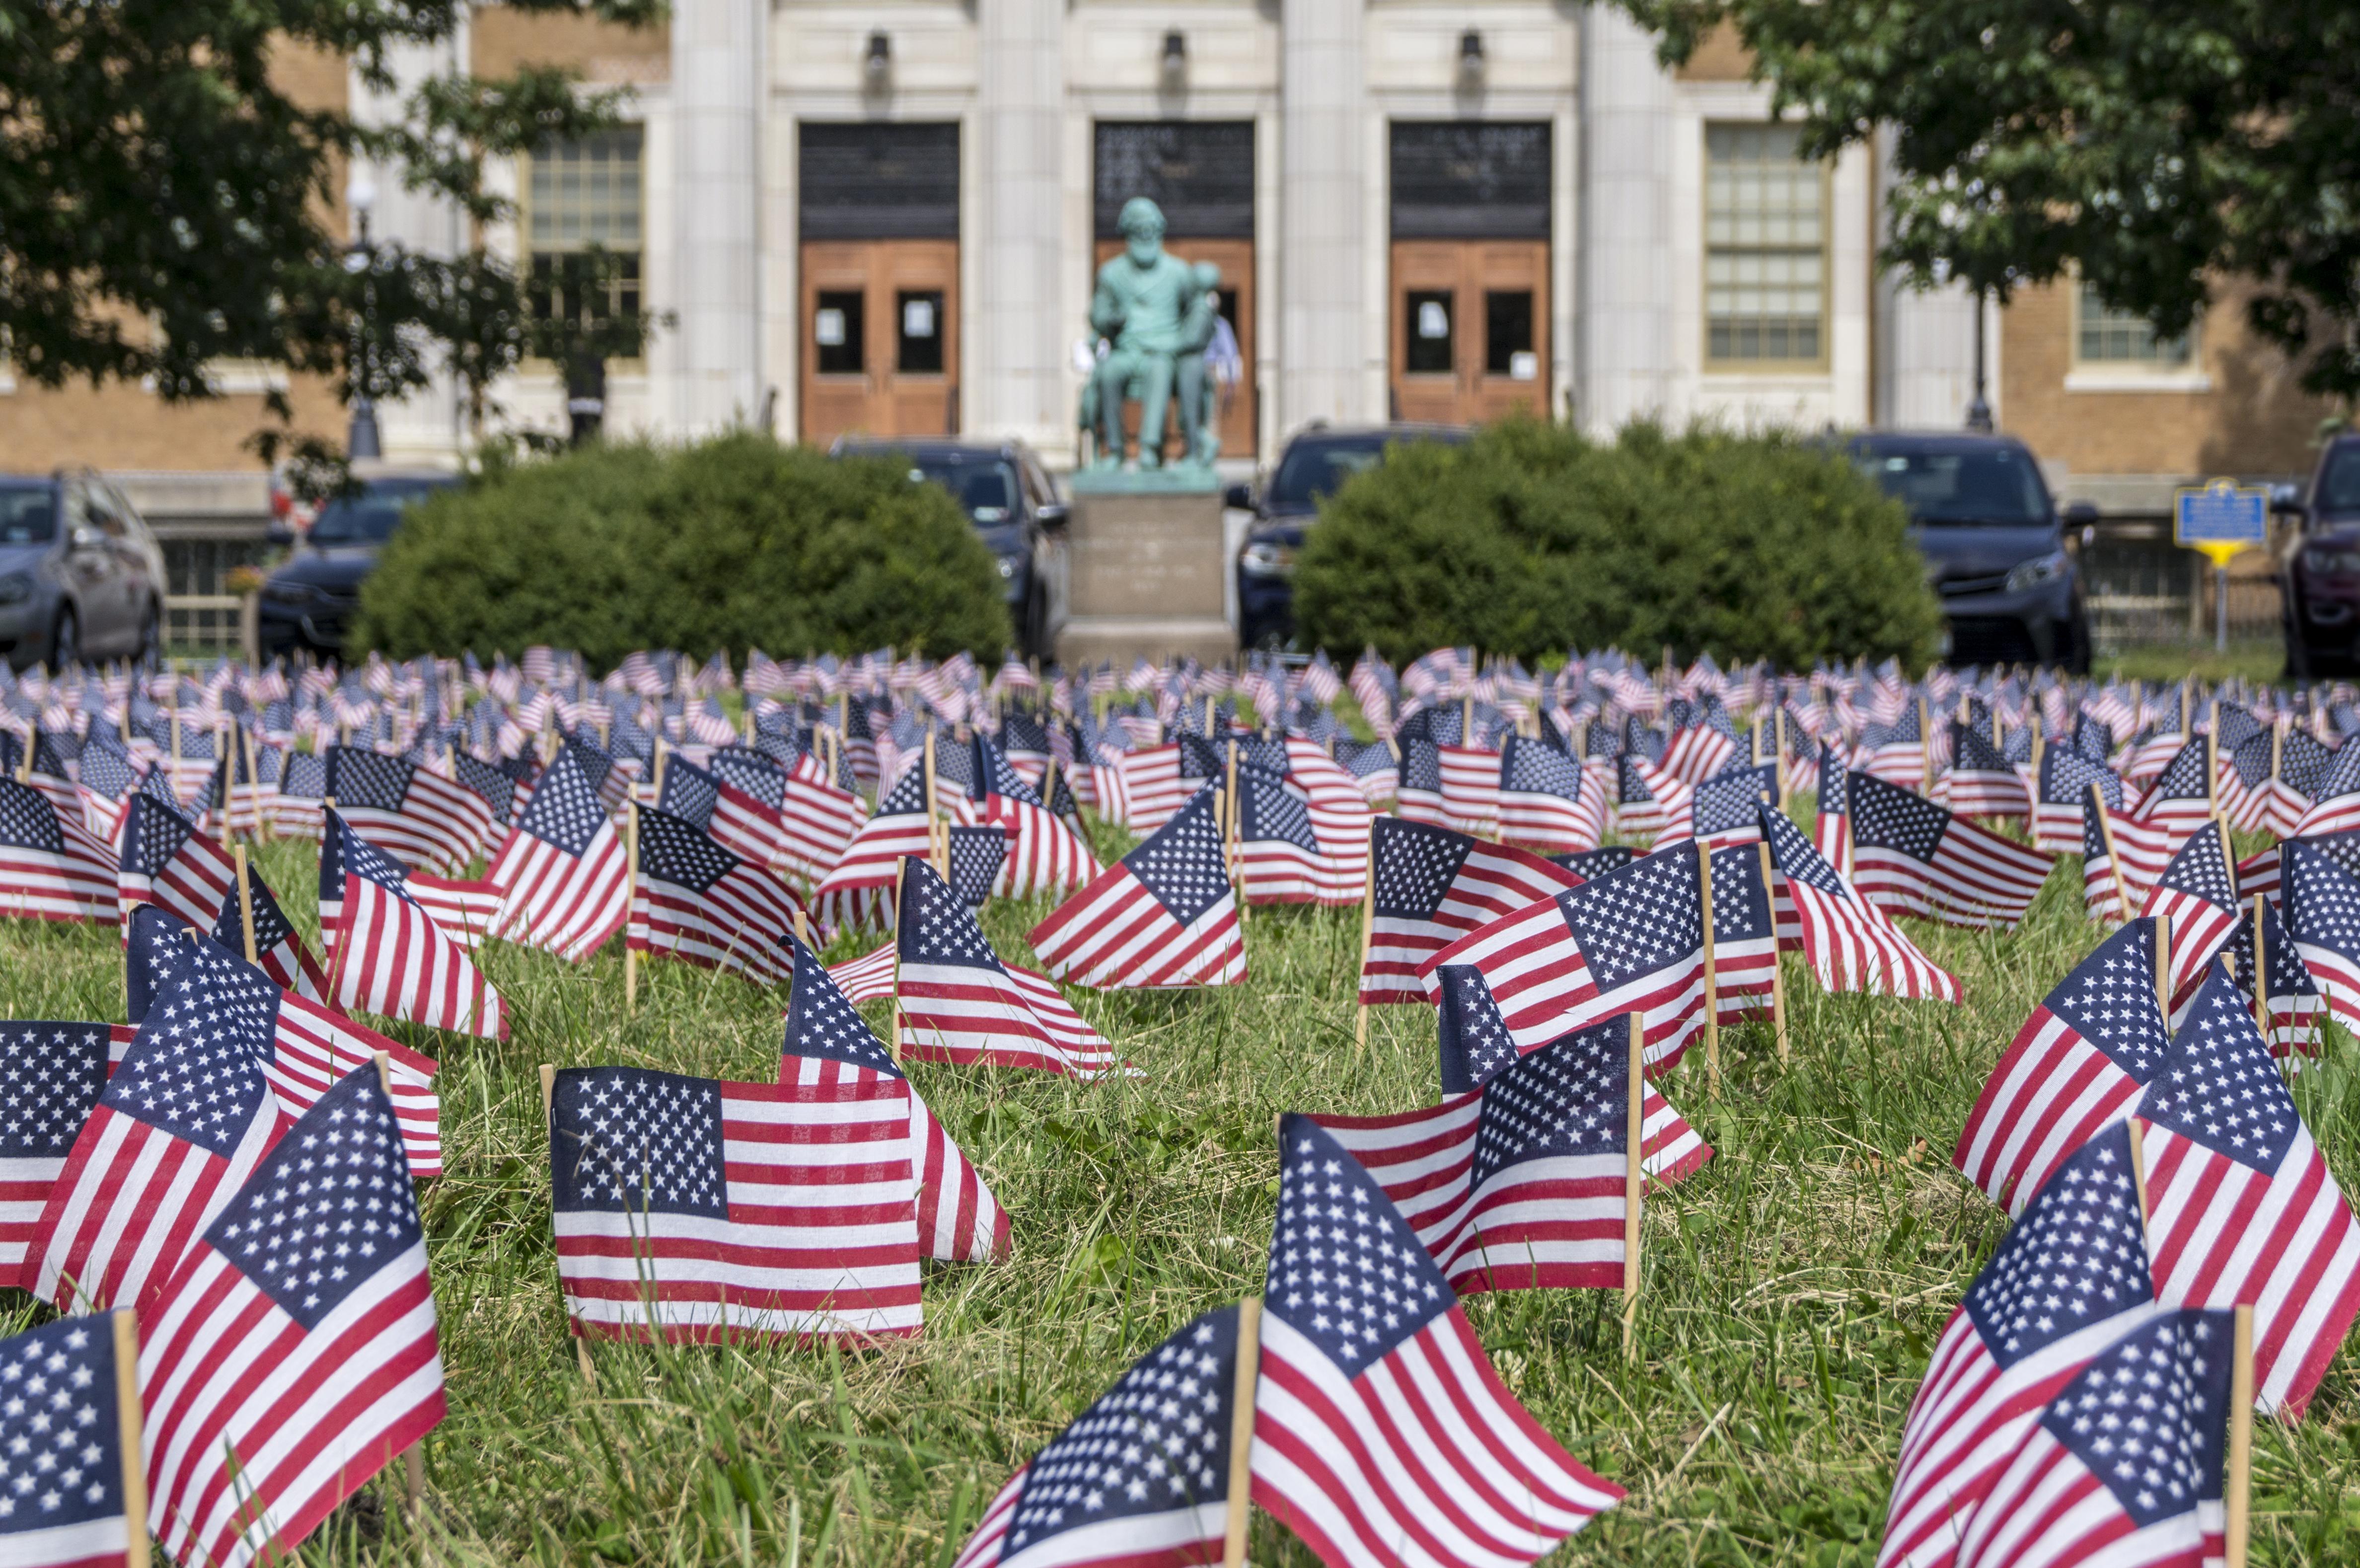 Students, veterans, first responders, faculty, staff, administrators and community members planted 2,996 flags on the front lawn of Sheldon Hall to remember every person killed in the 9/11 terrorist attacks